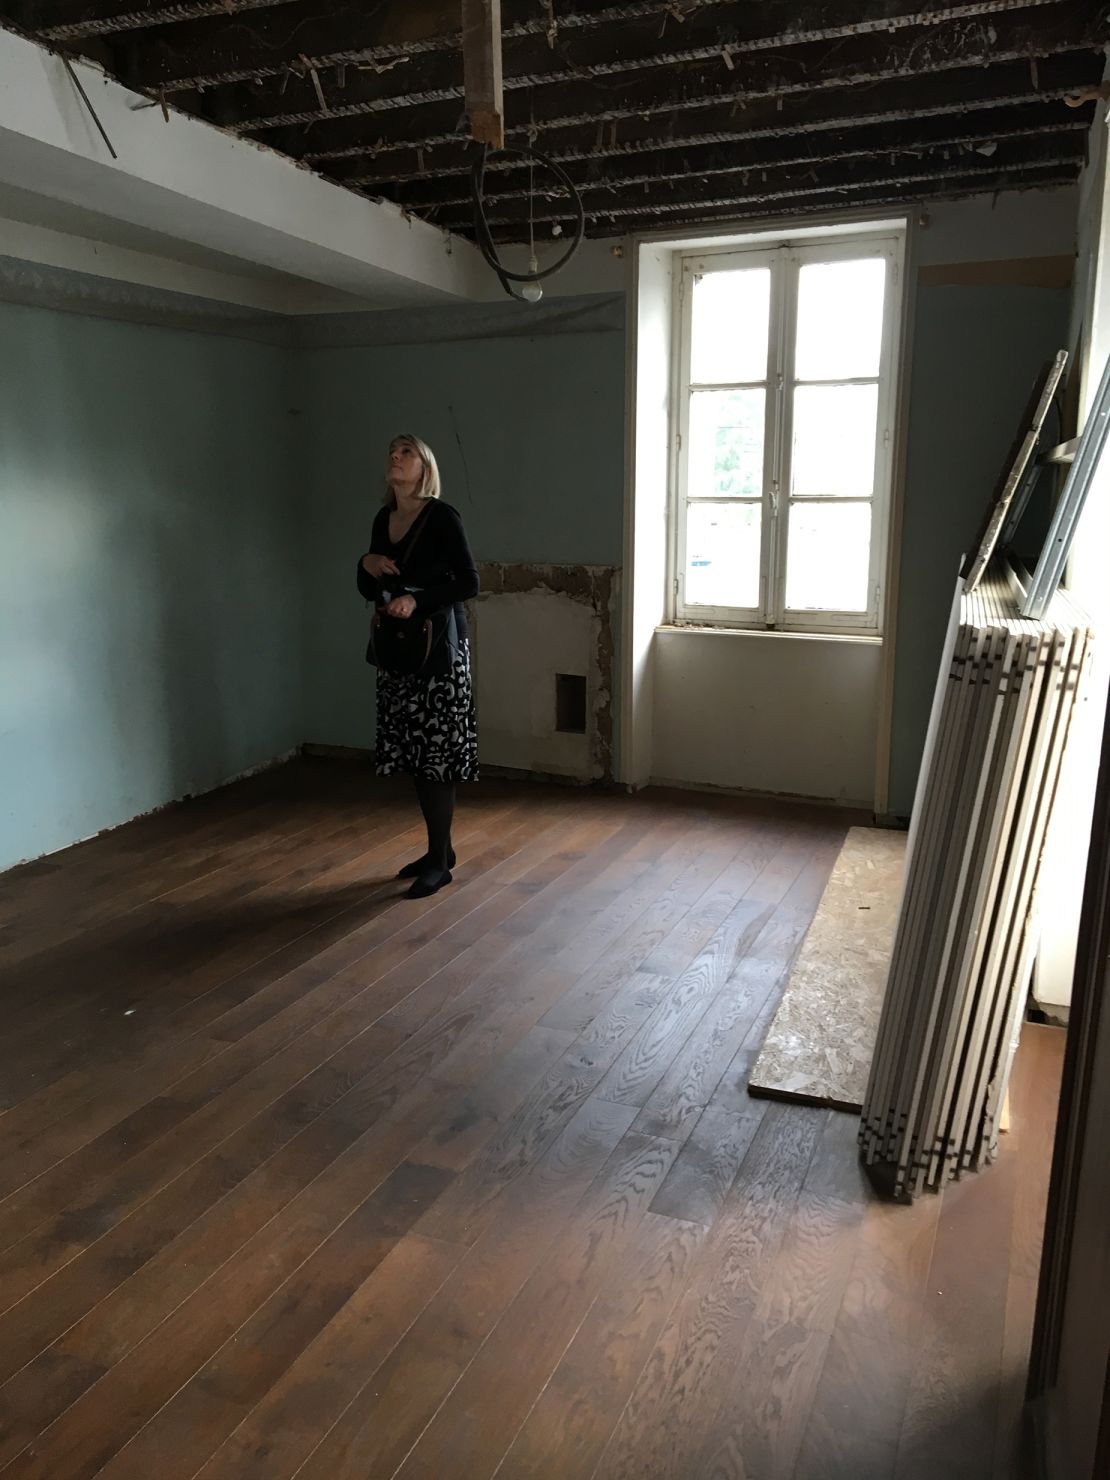 Ellen and her husband Joseph came across a rundown home in the historic village of Lonlay l'Abbaye in Normandy and purchased it unseen.